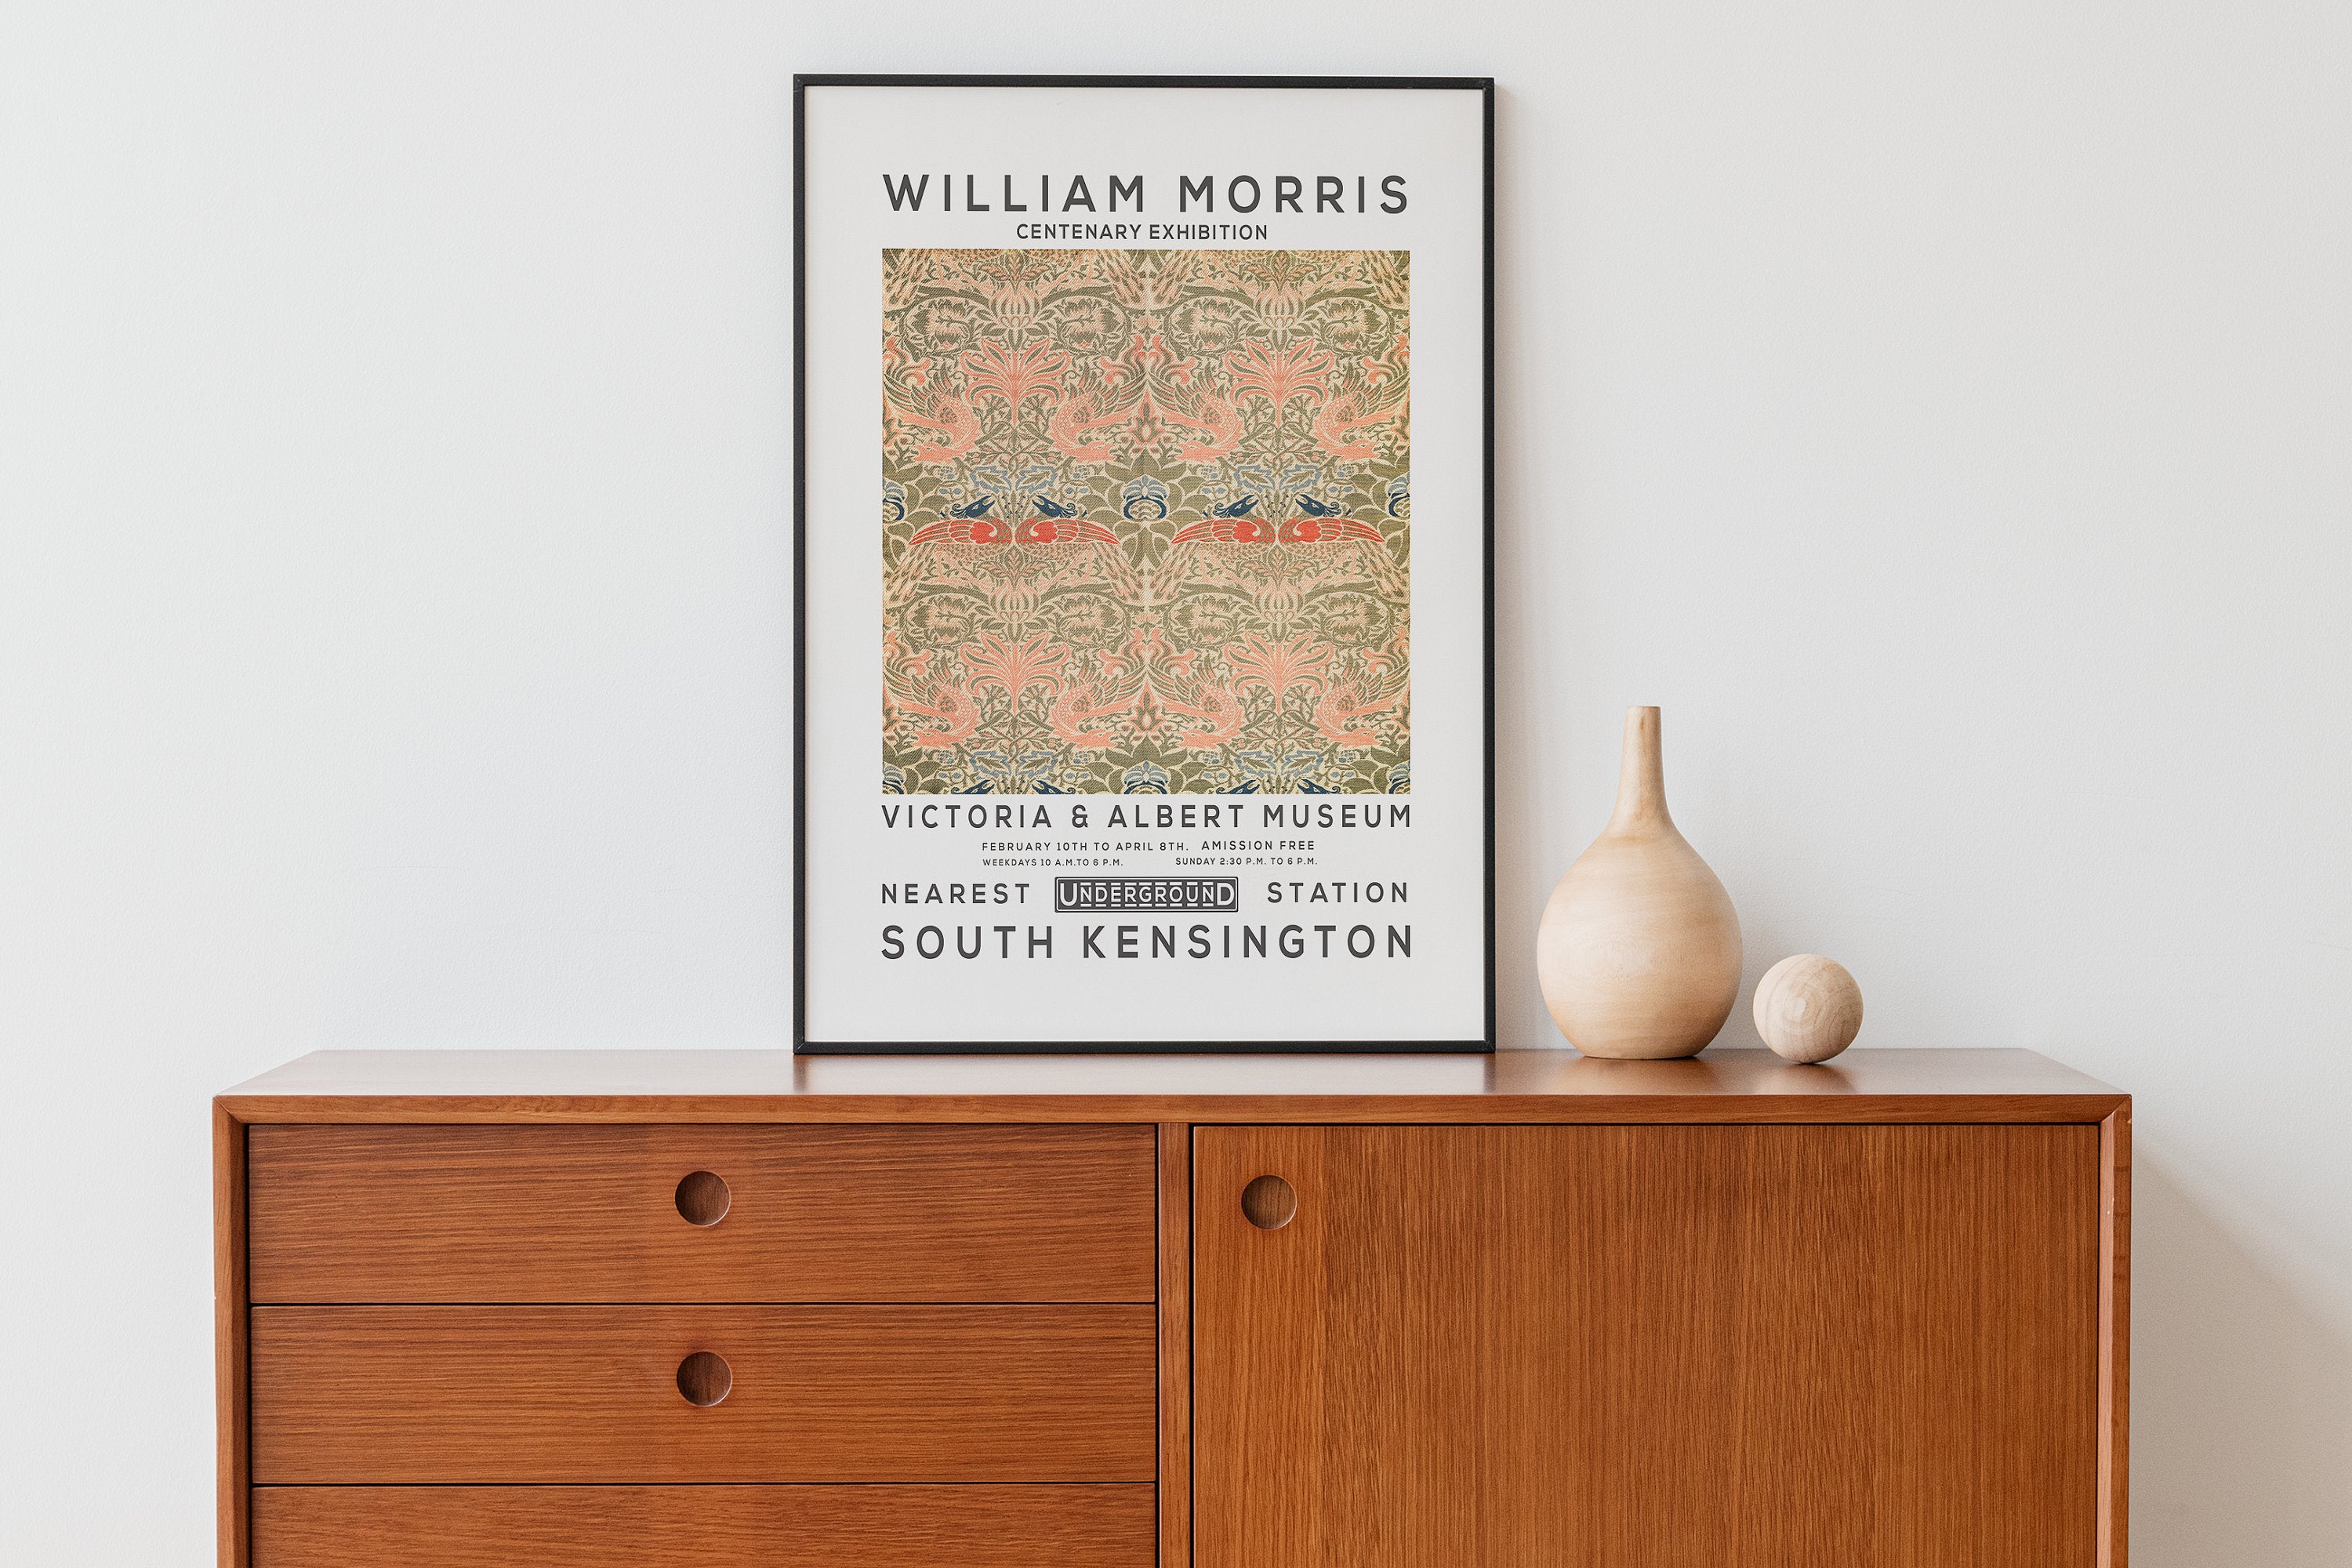 William Morris Print, Vintage Wall Decor, Exhibition Poster, Floral Wall Art, Flower Print, Home Decor, Peacock